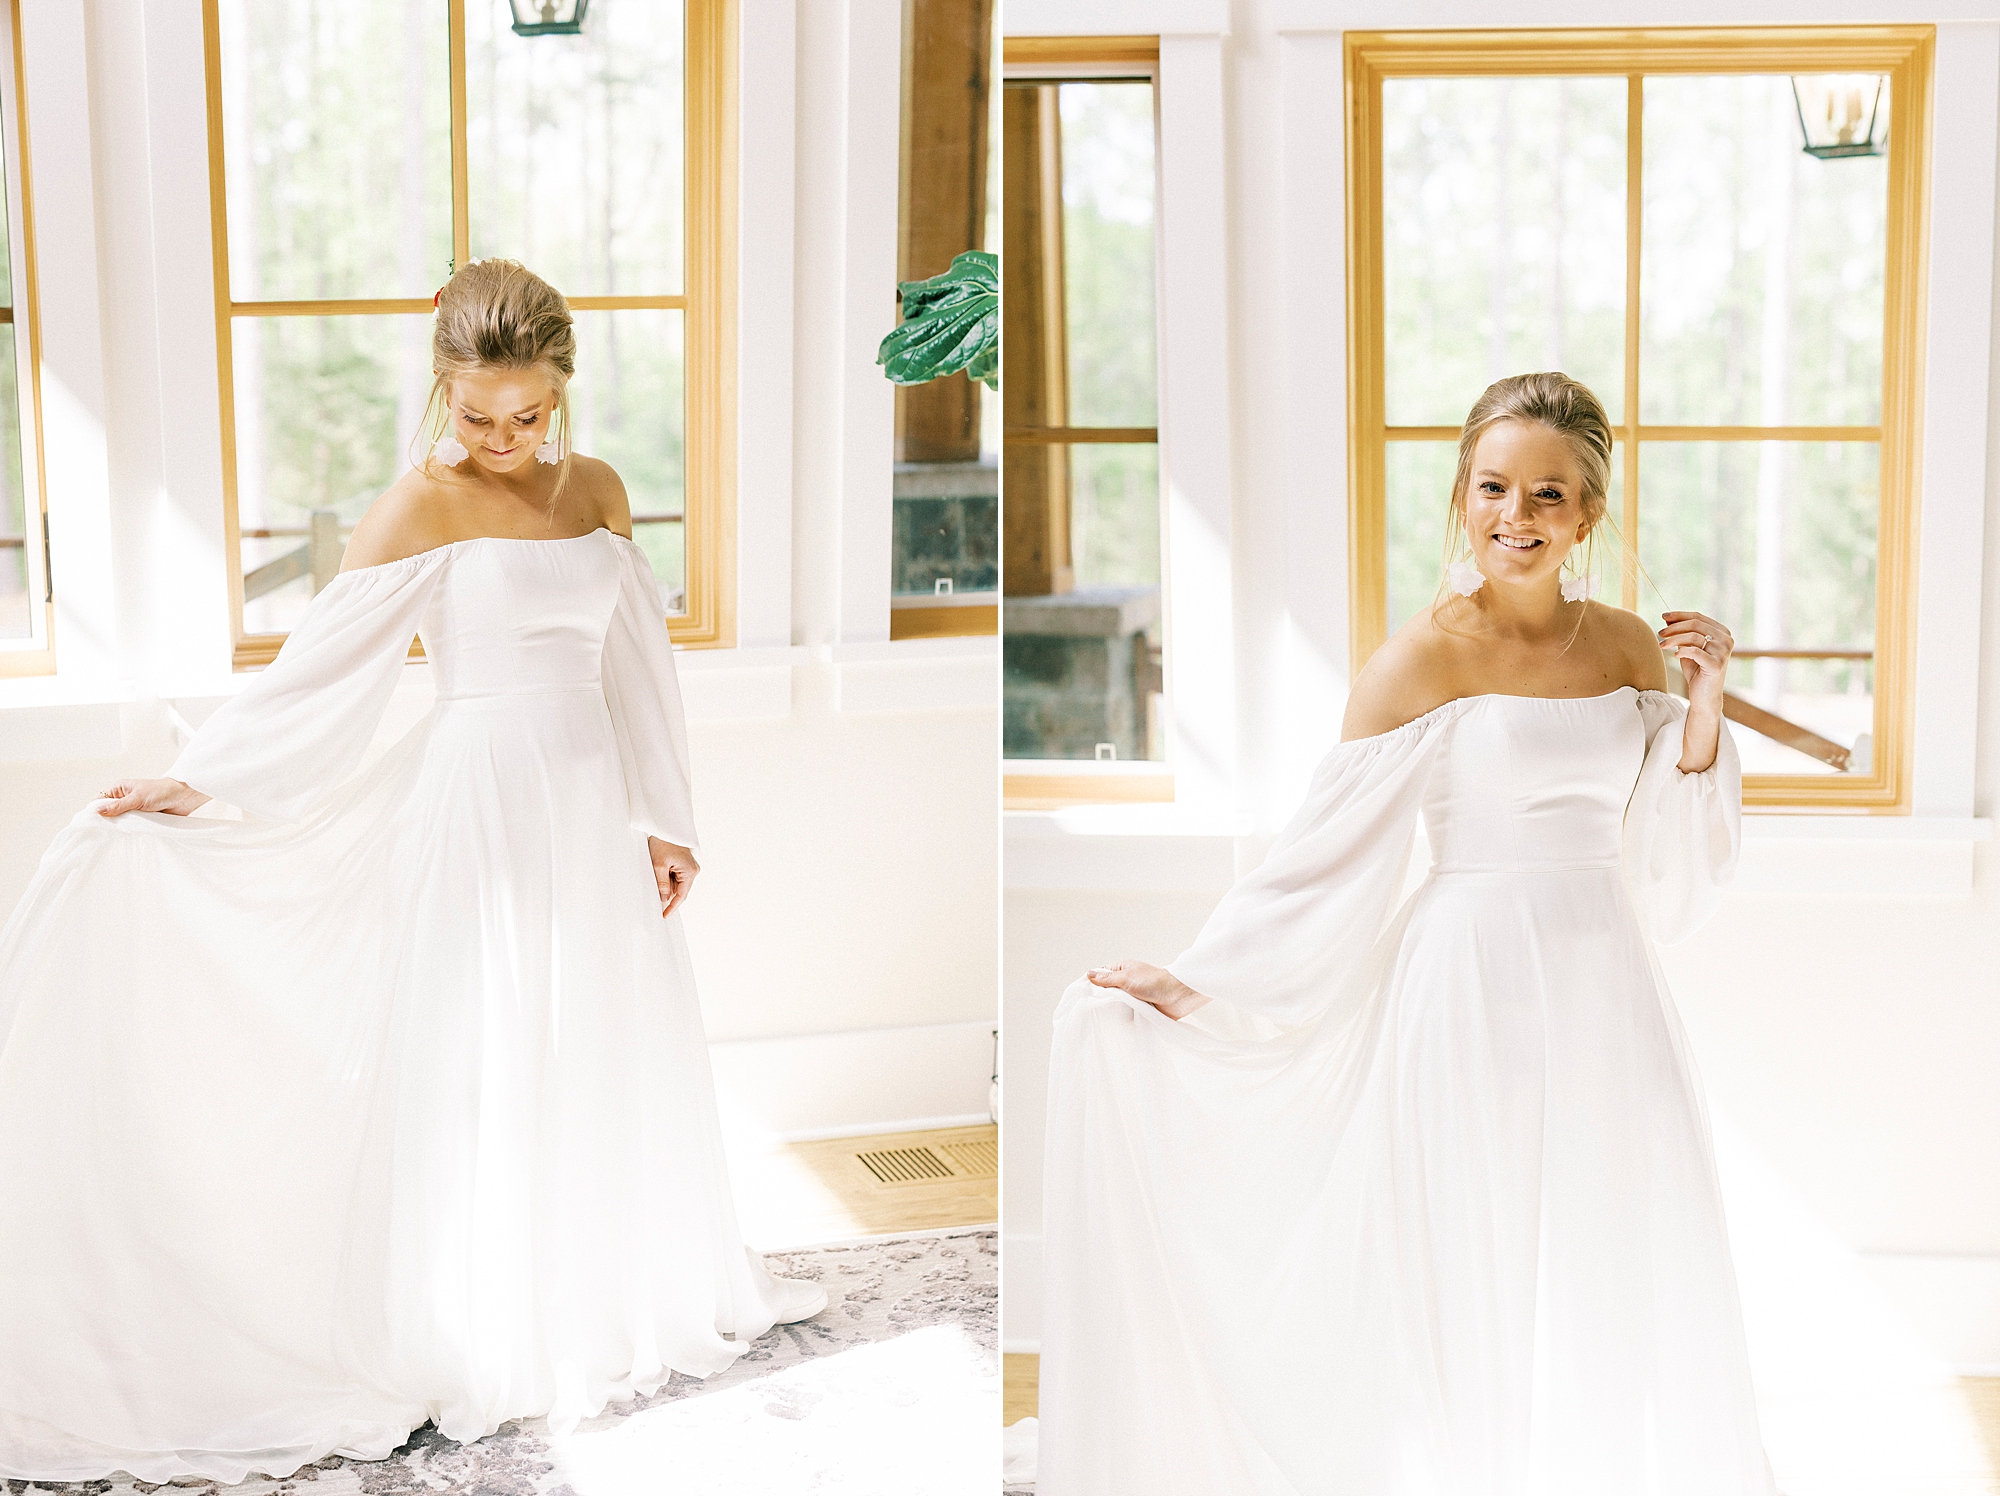 bride in boho style wedding dress spins in living room